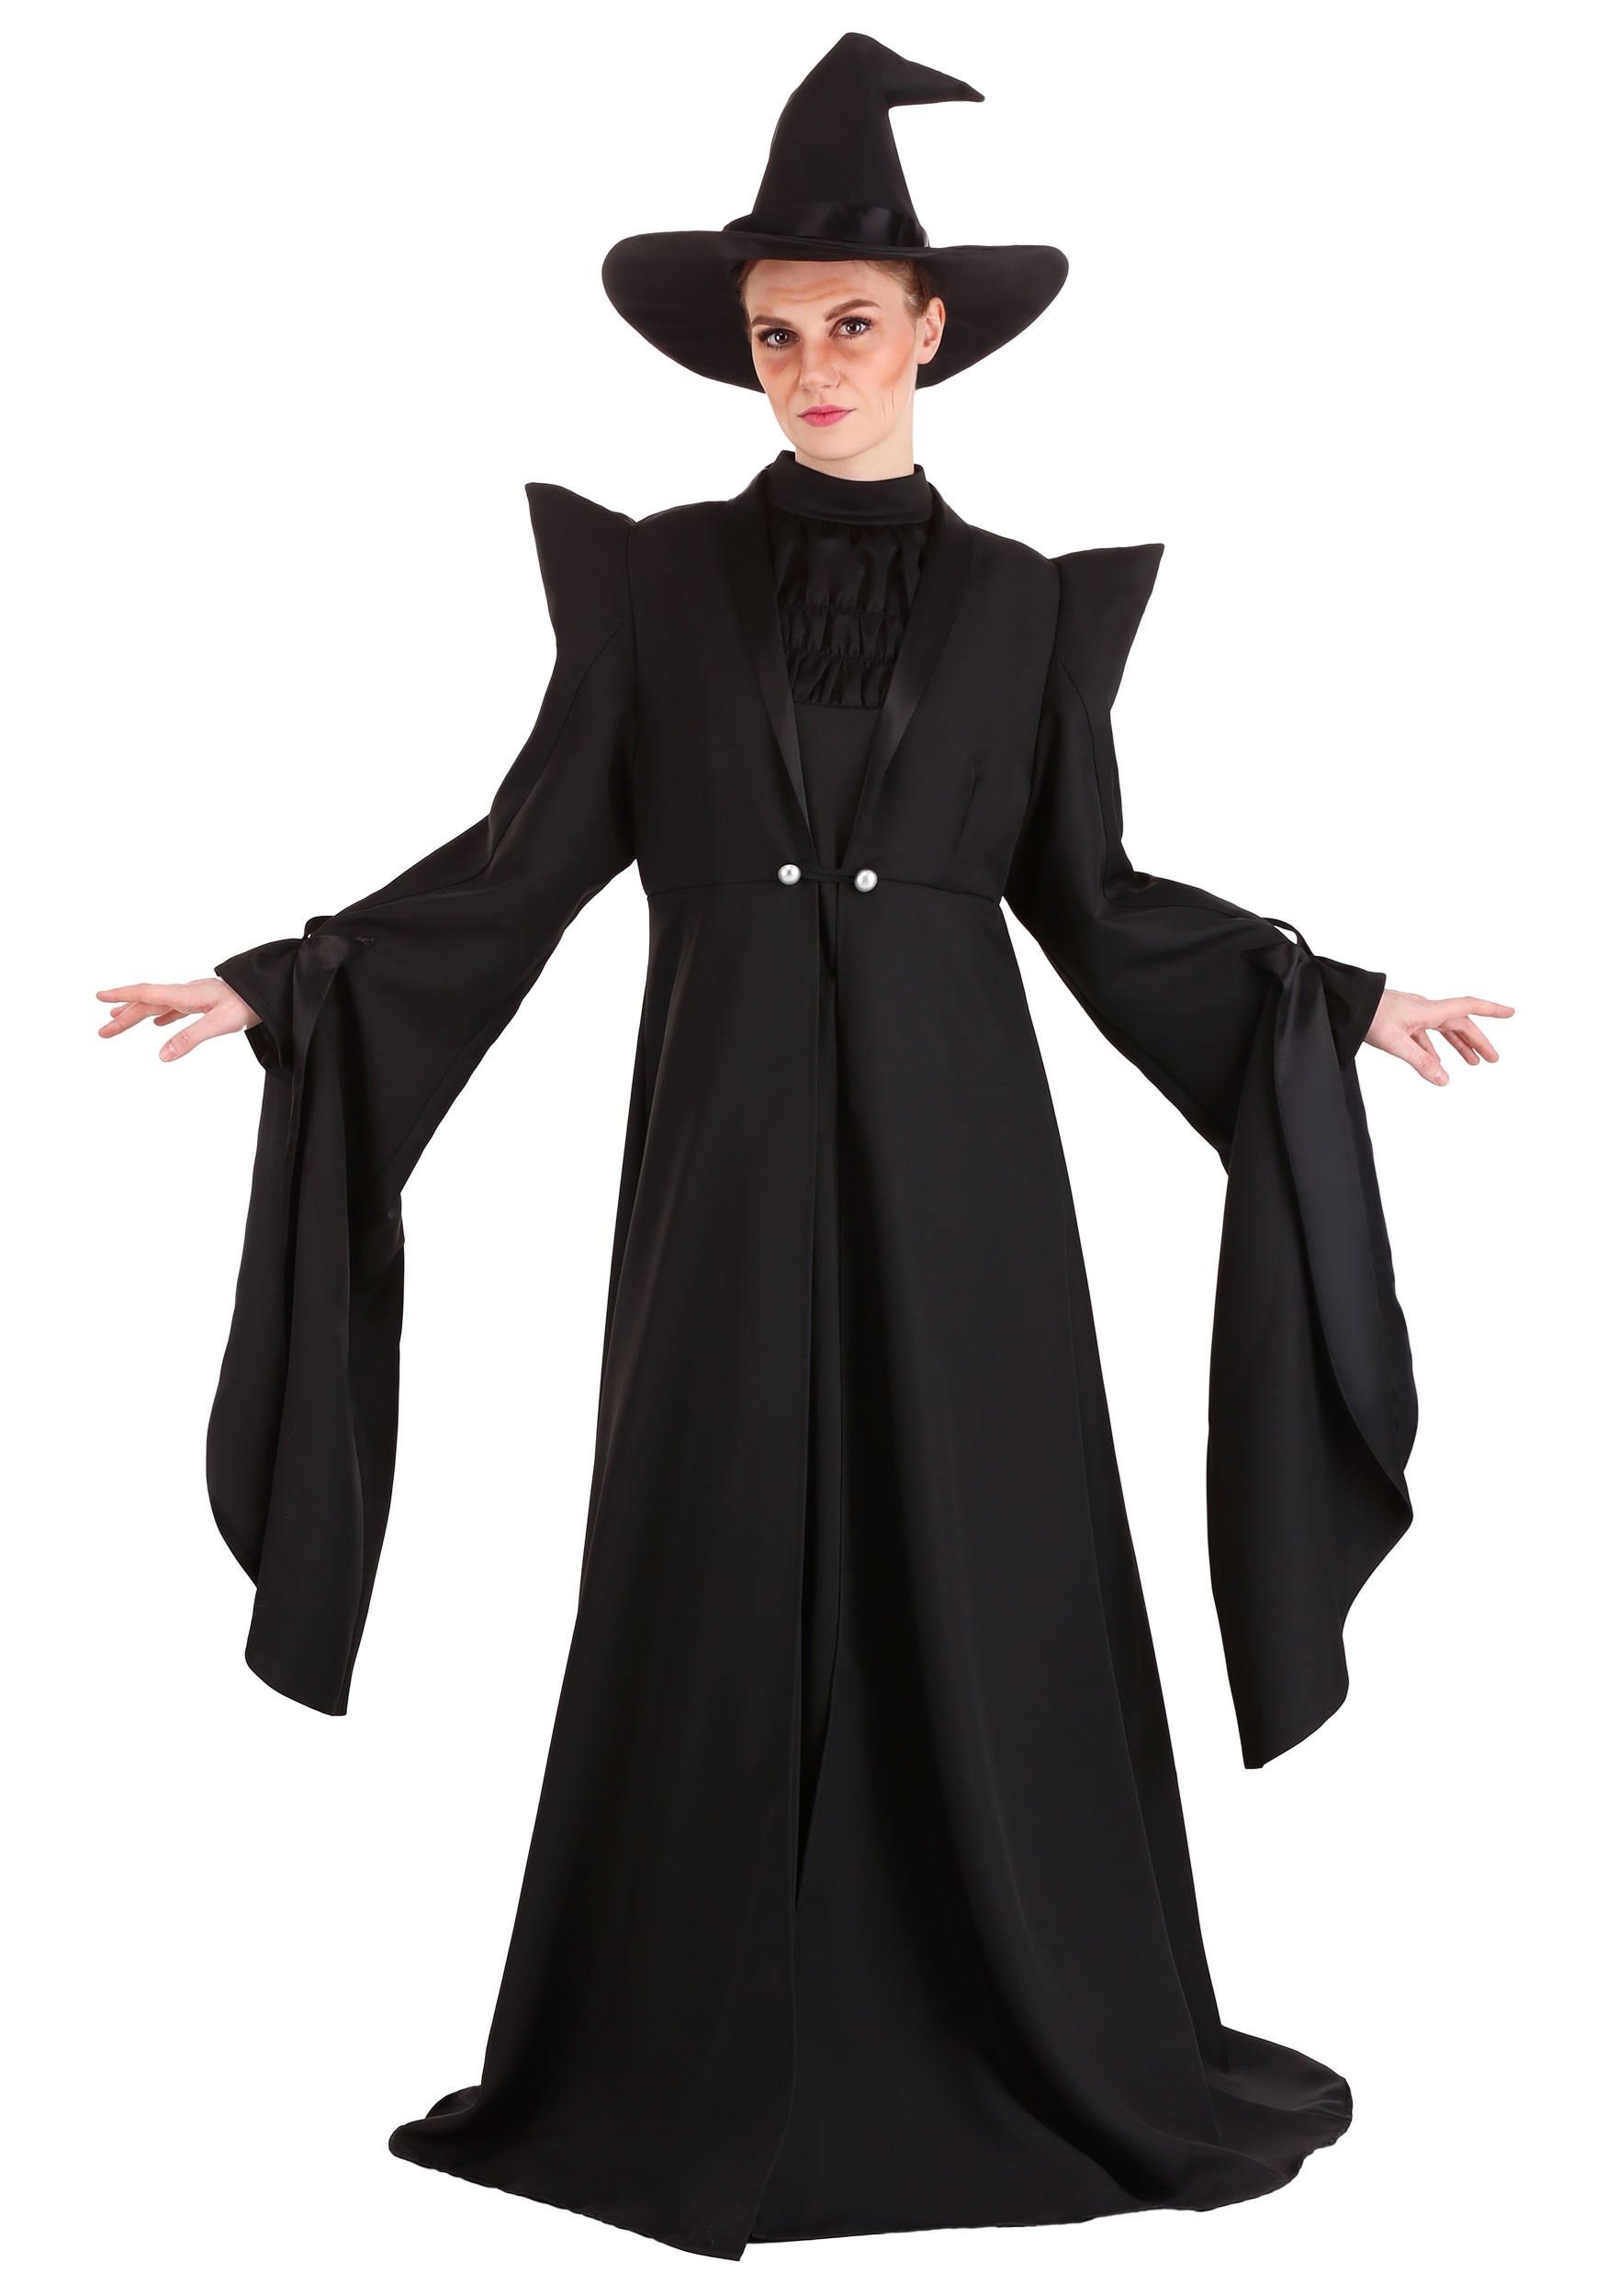 Photos - Fancy Dress Deluxe Jerry Leigh  Plus Size Harry Potter McGonagall Costume Black FUN1442 